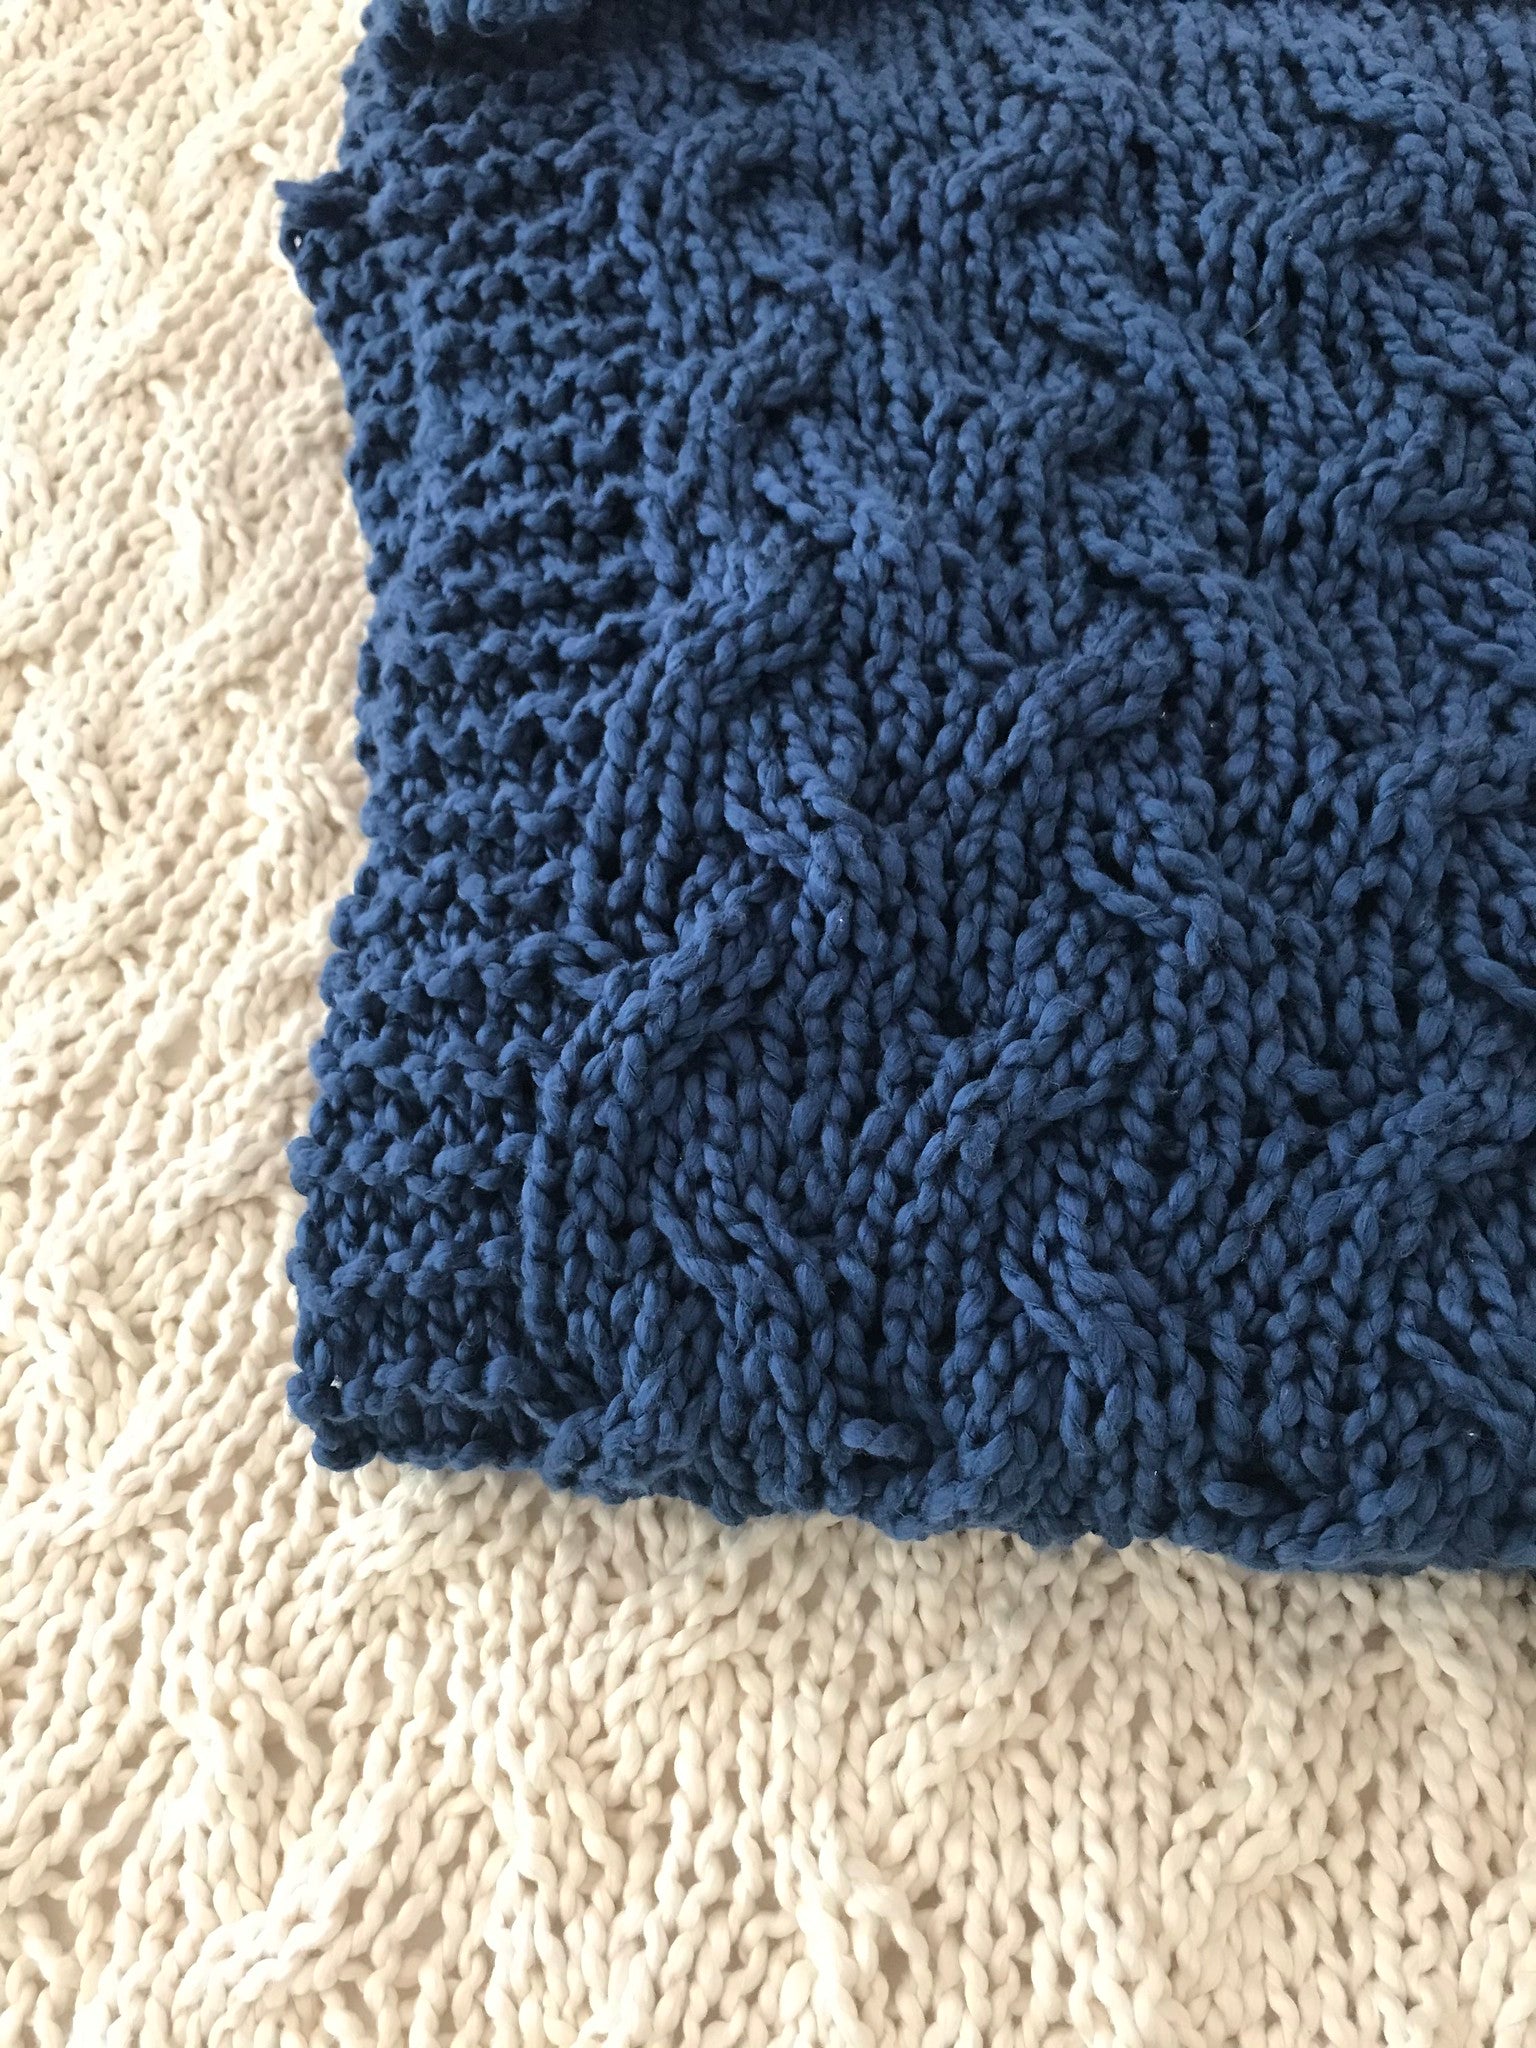 DIY Kit - My First Cable Blanket - Big Cotton